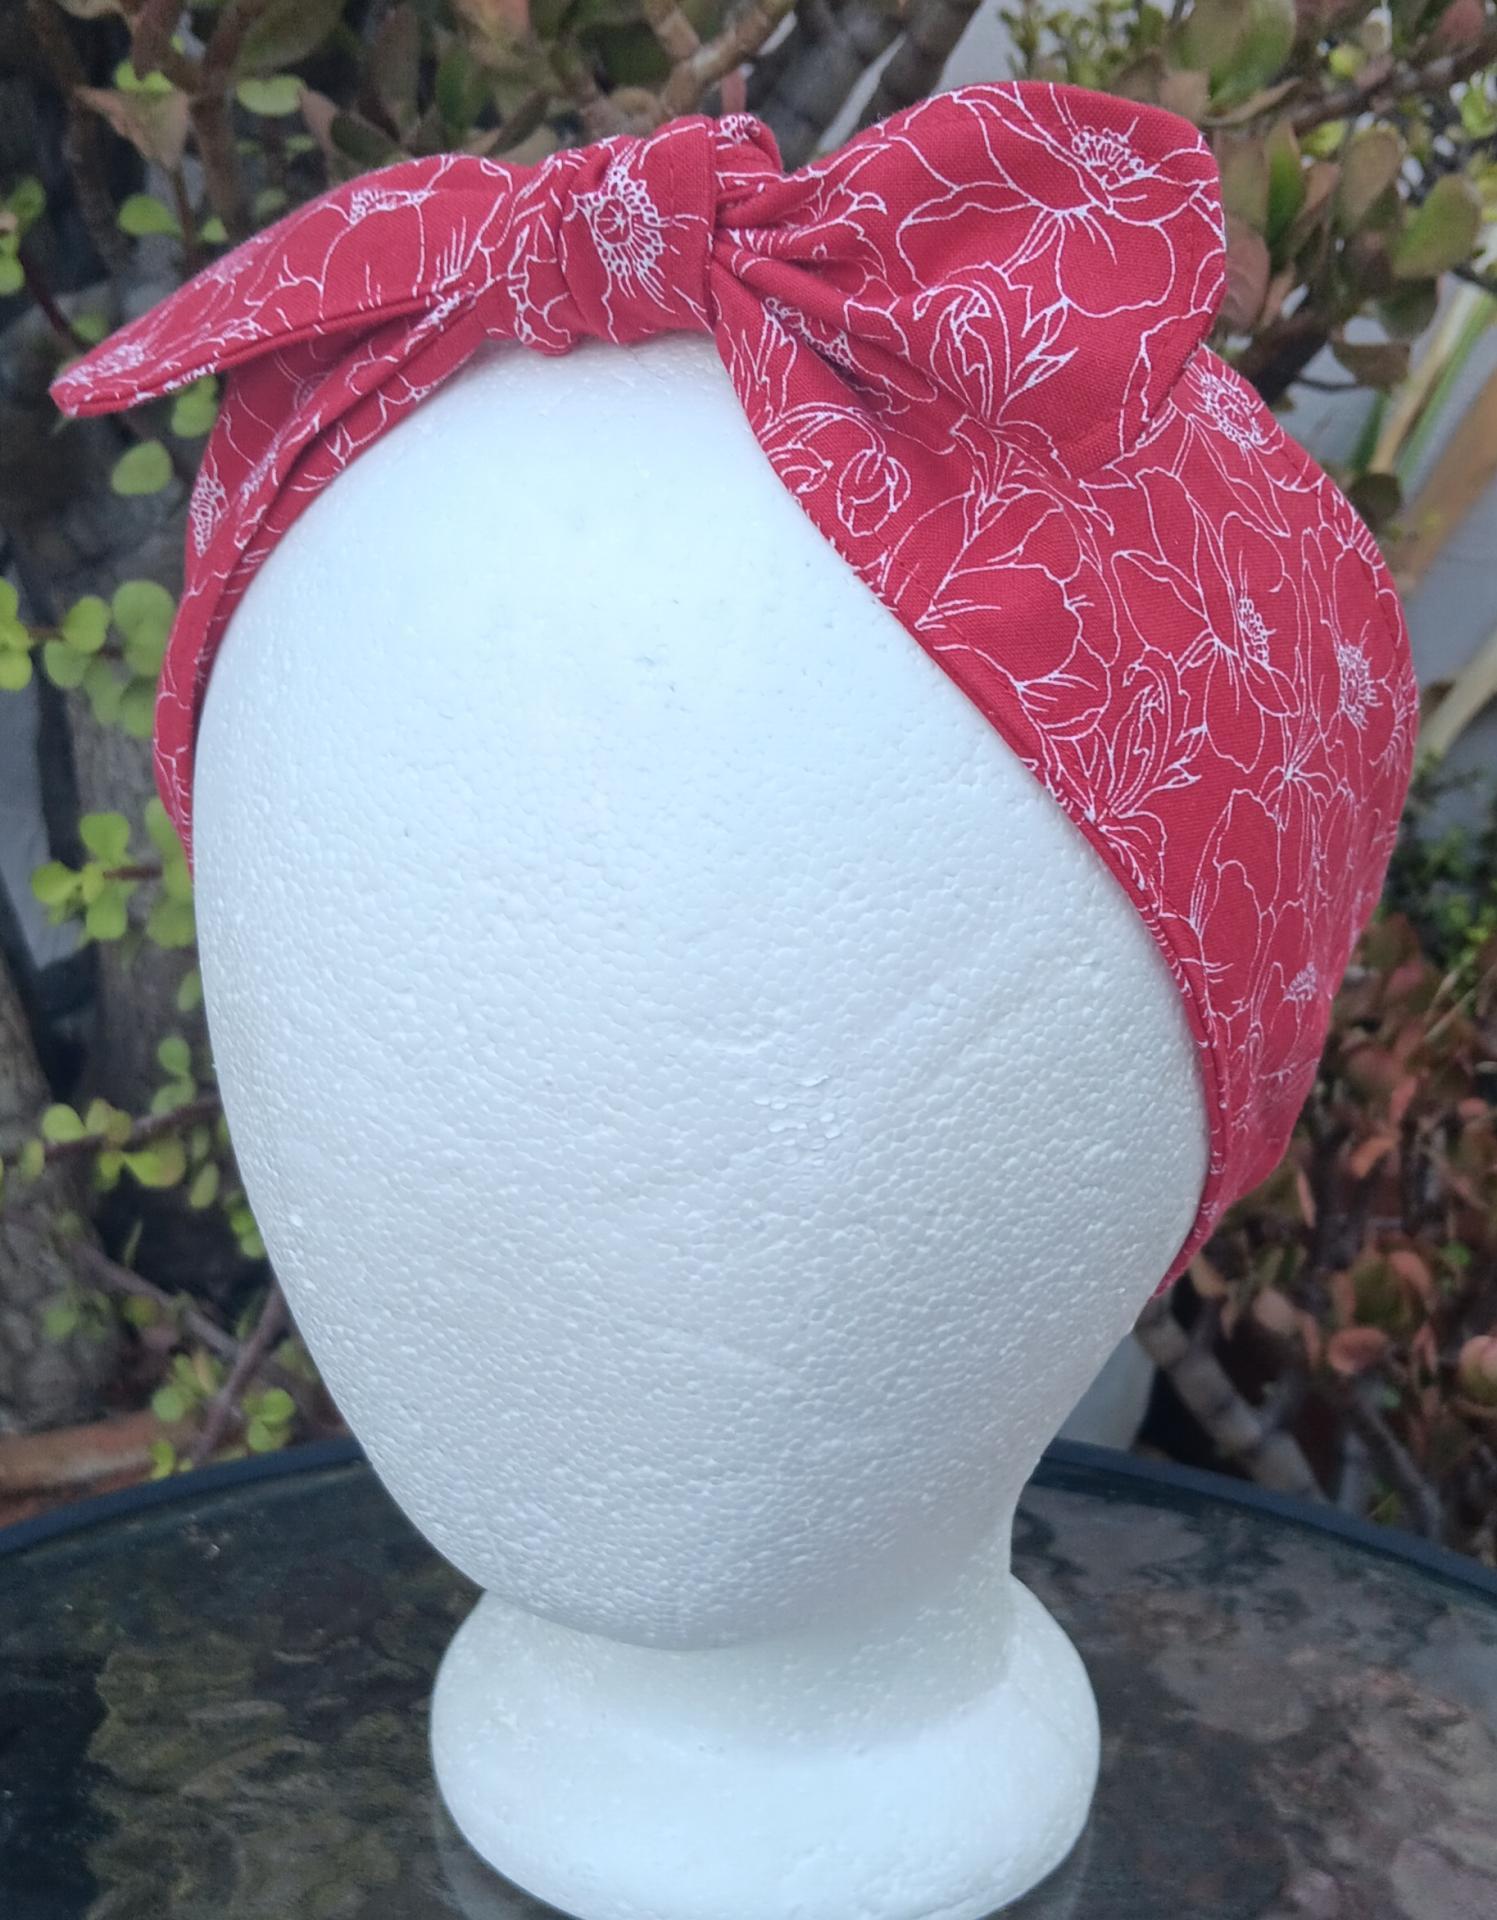 3” Wide Poppies Floral headband, self tie, hair wrap, pin up style, hair tie, retro style, rockabilly, head scarf